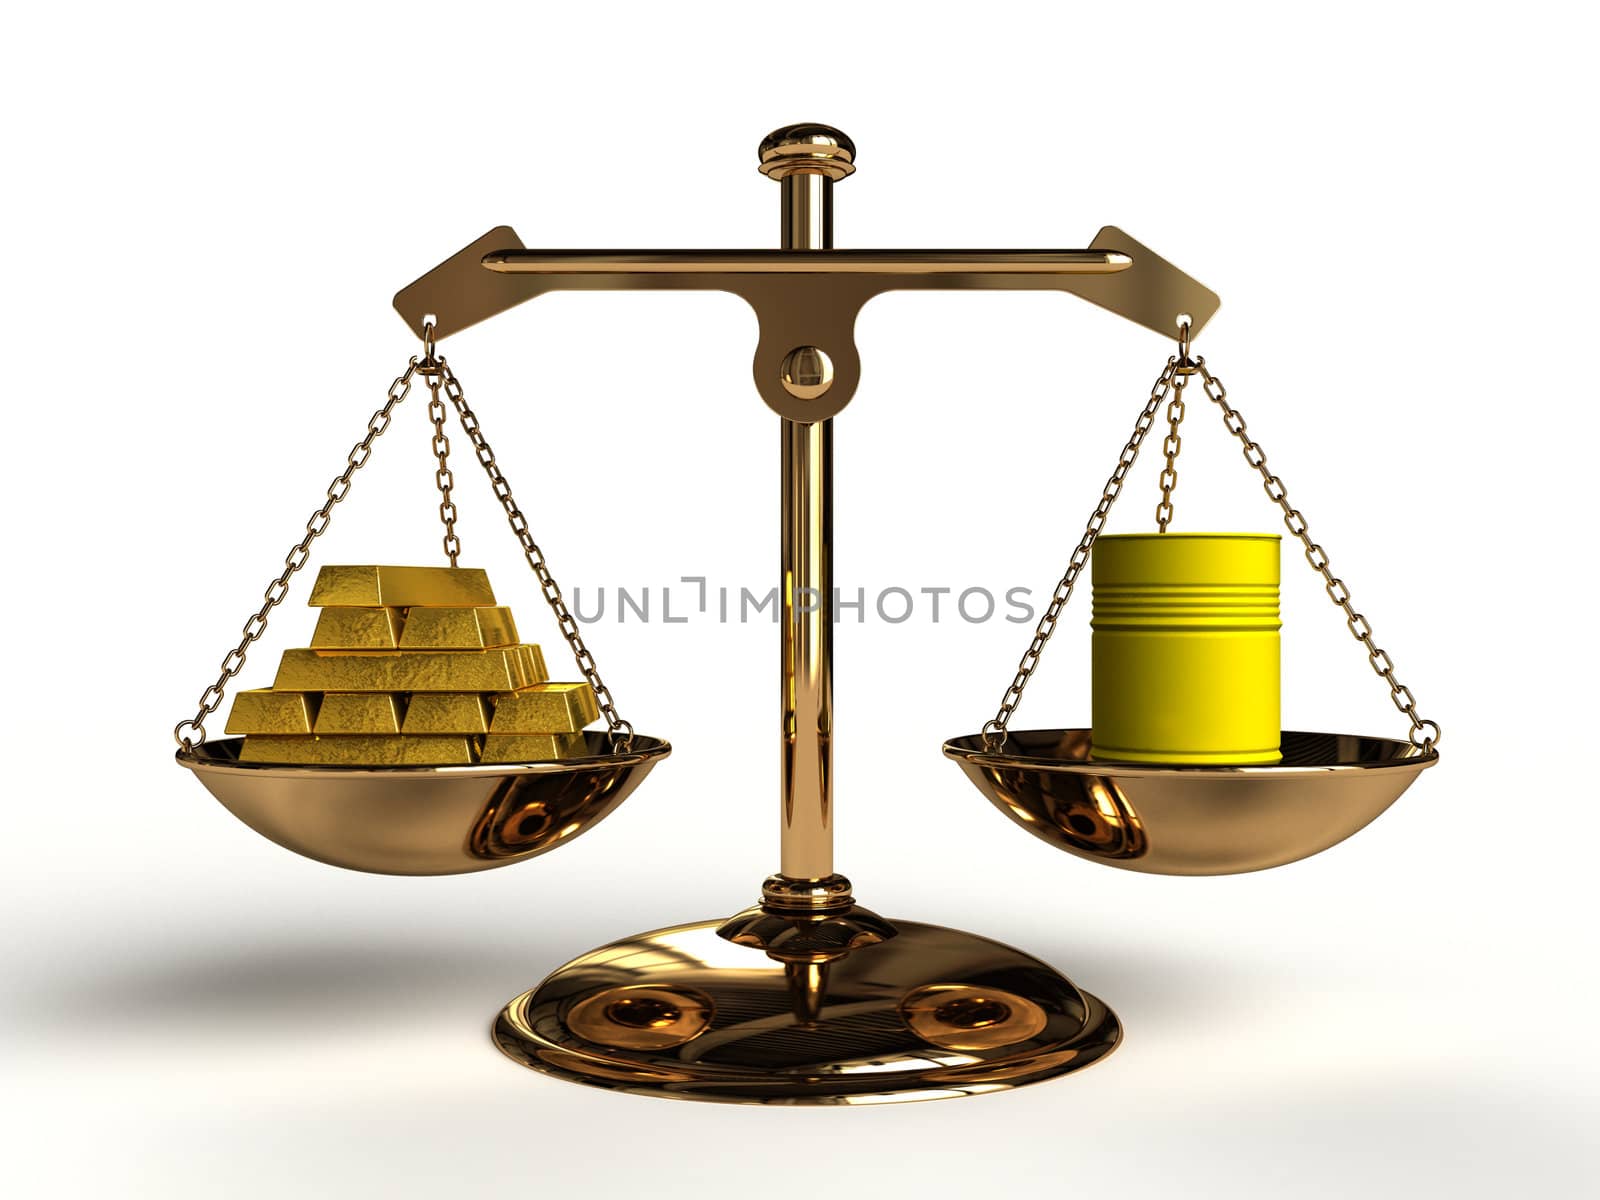 The cost of Pollution; On a golden balance, are compared in a yellow oil drum and a lot of gold bullion, computer-generated conceptual image.